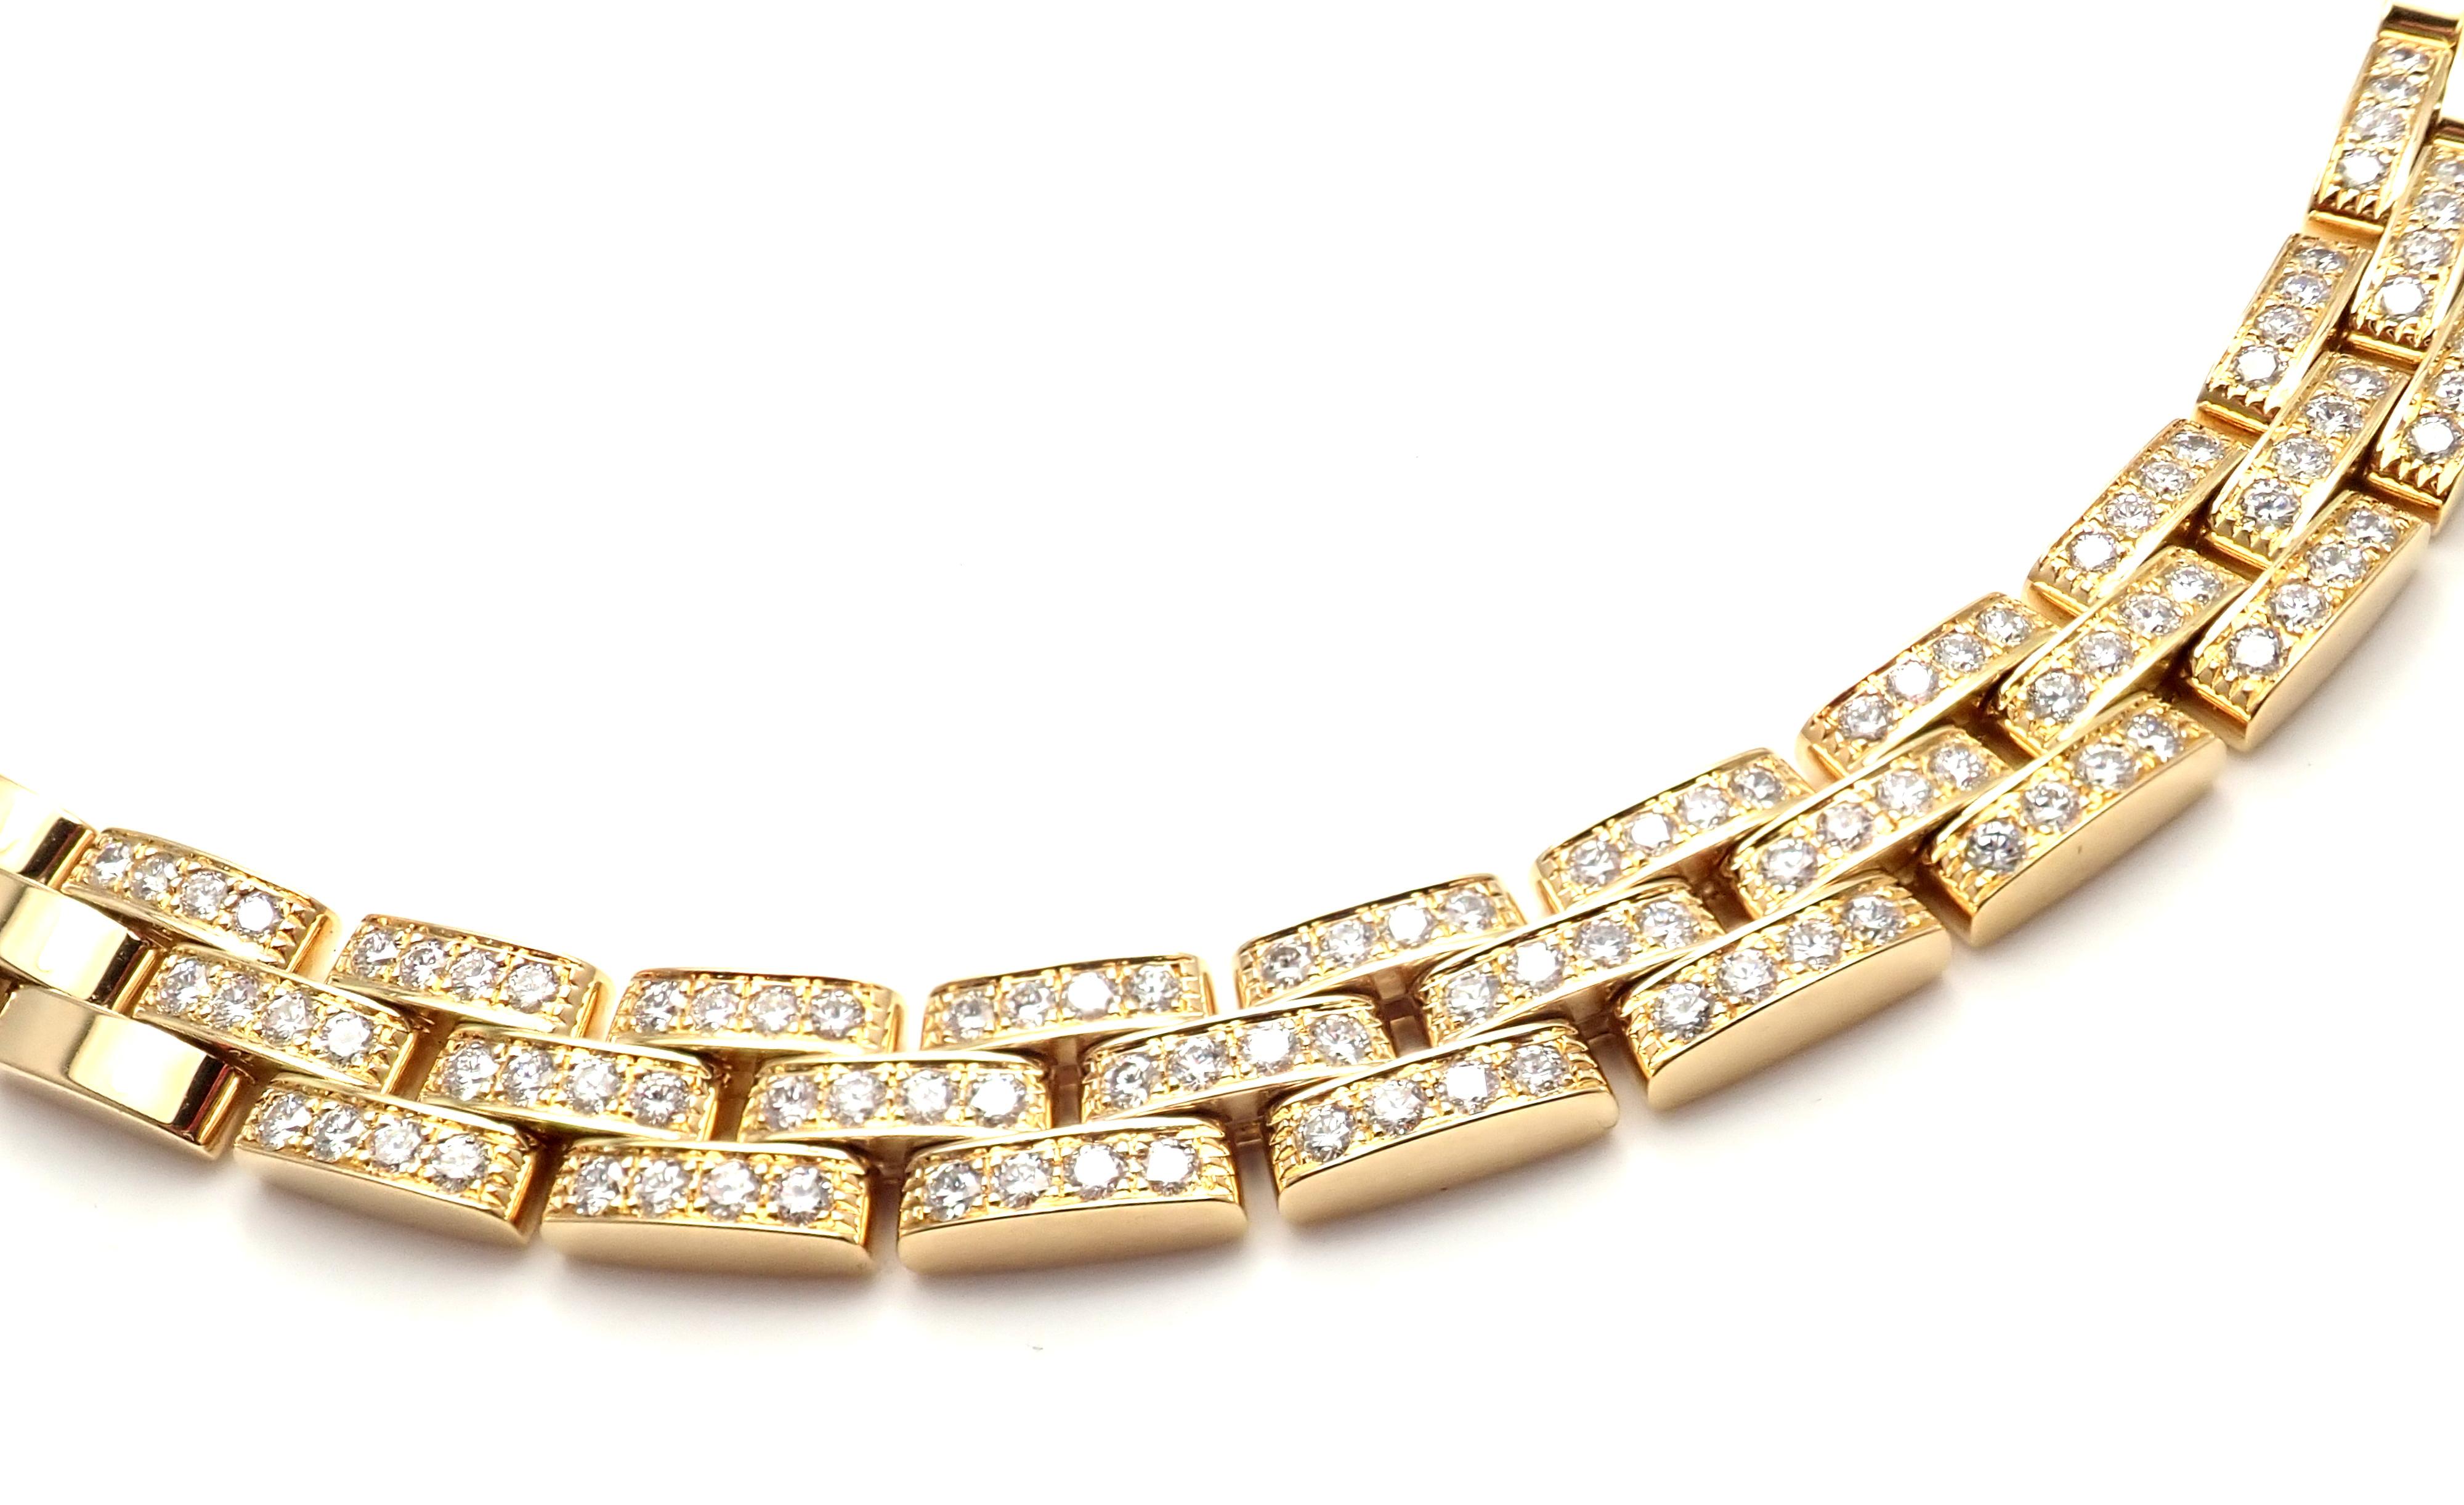 18k Yellow Gold Diamond Maillon Panthere Necklace by Cartier. 
This necklace is in mint condition and comes with Cartier service paper from 
Cartier store and a Cartier box.
With 228 round brilliant cut diamonds VVS1 clarity E color total weight